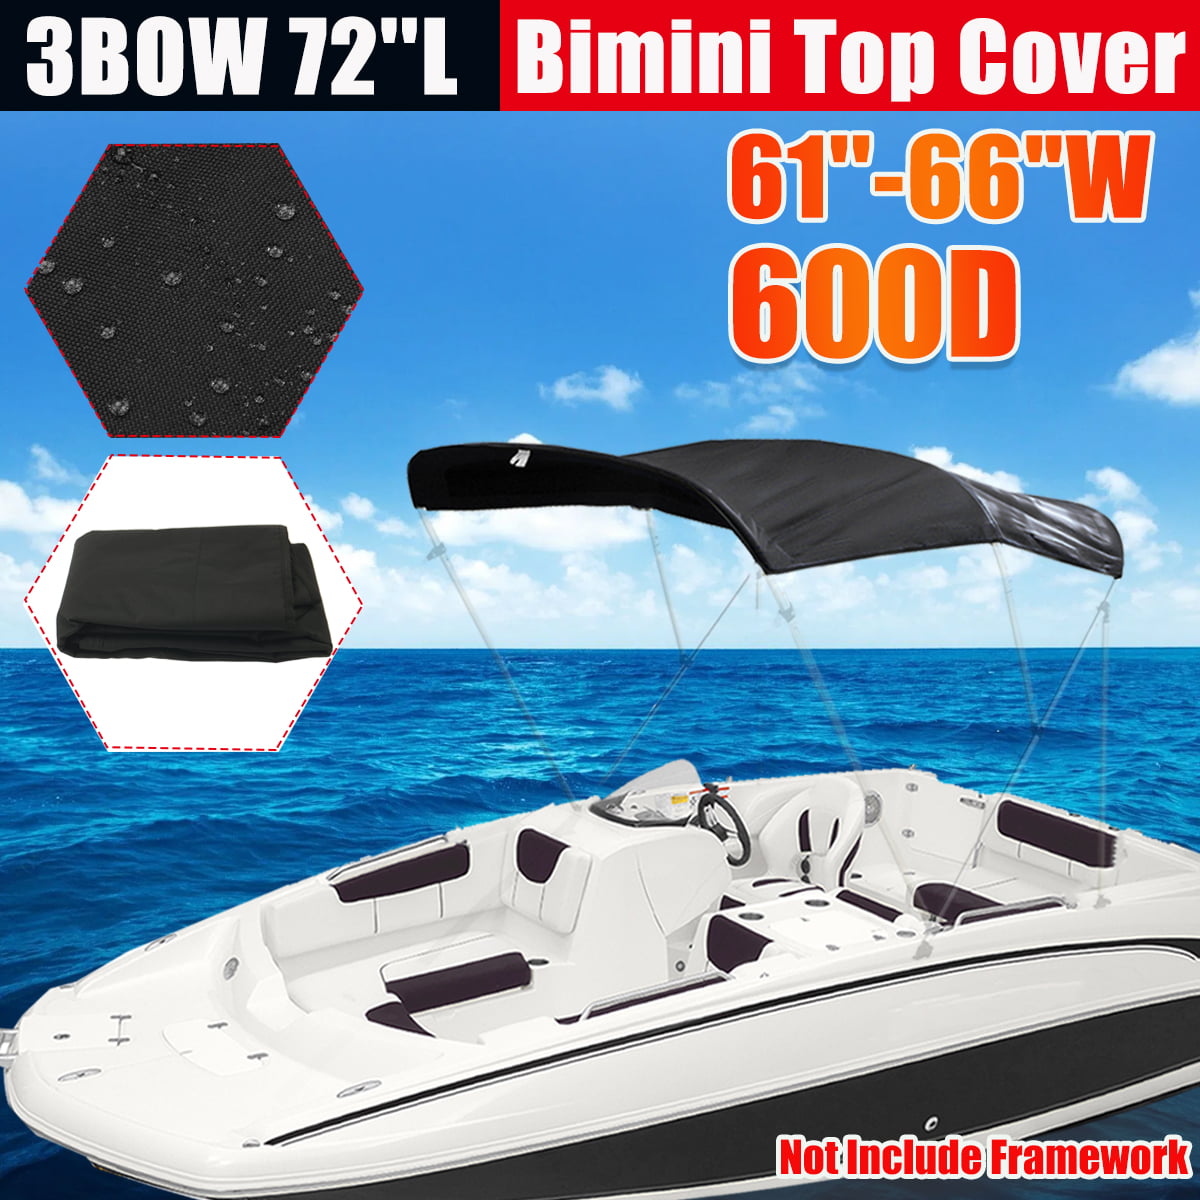 ALEKO Winter Waterproof Canopy for BT250 Inflatable Boat Black Color 